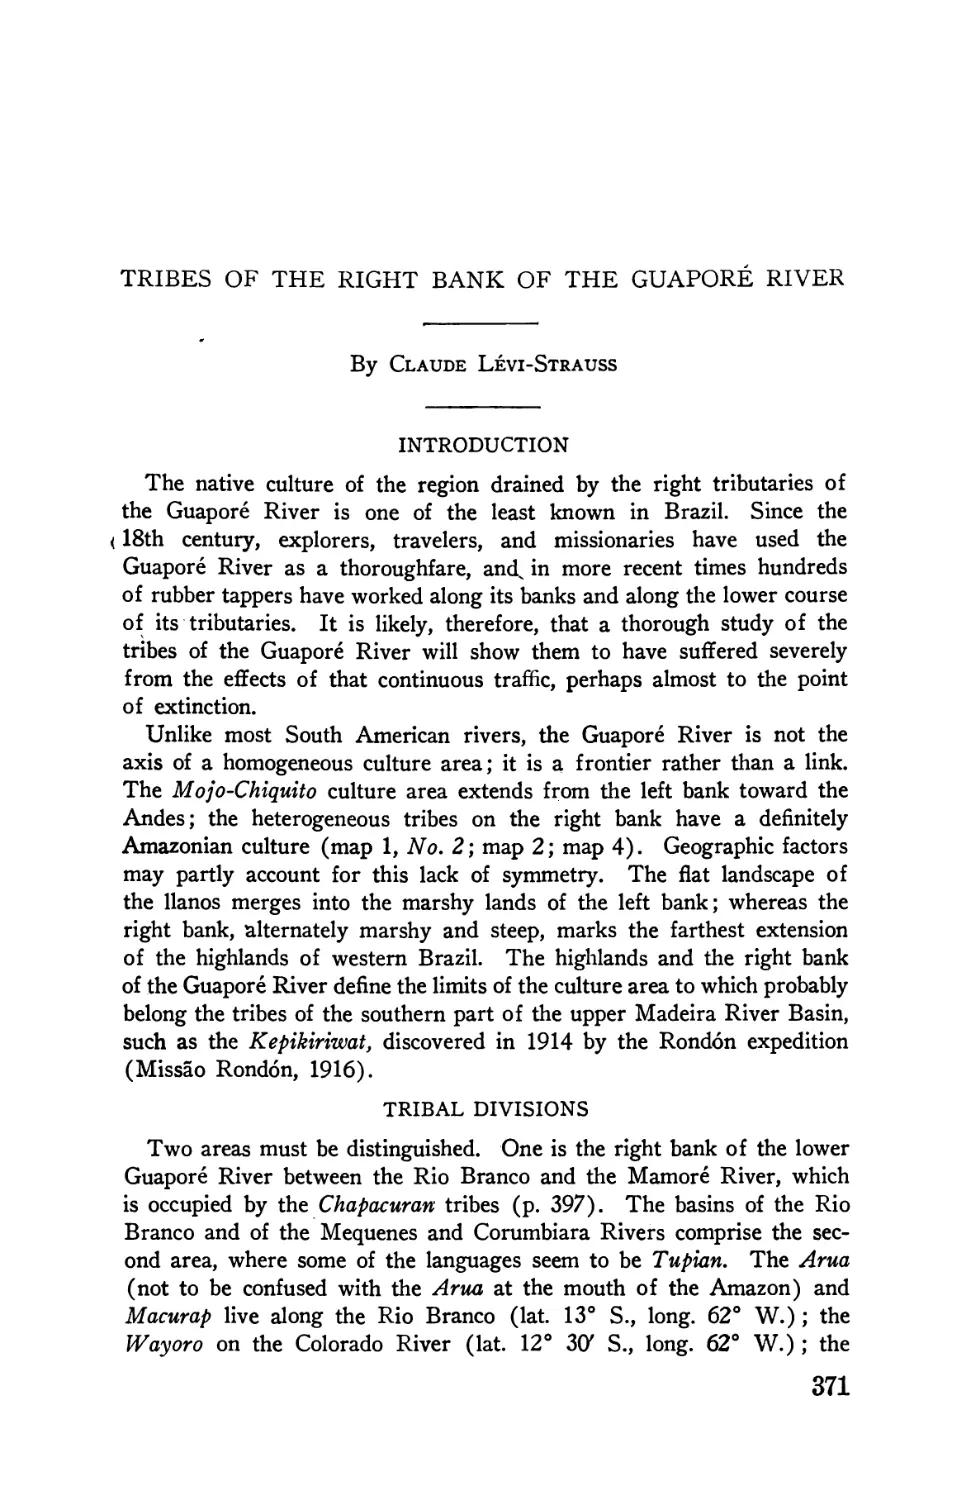 Tribes of the right bank of the Guaporé River, by Claude Lévi-Strauss
Tribal divisions